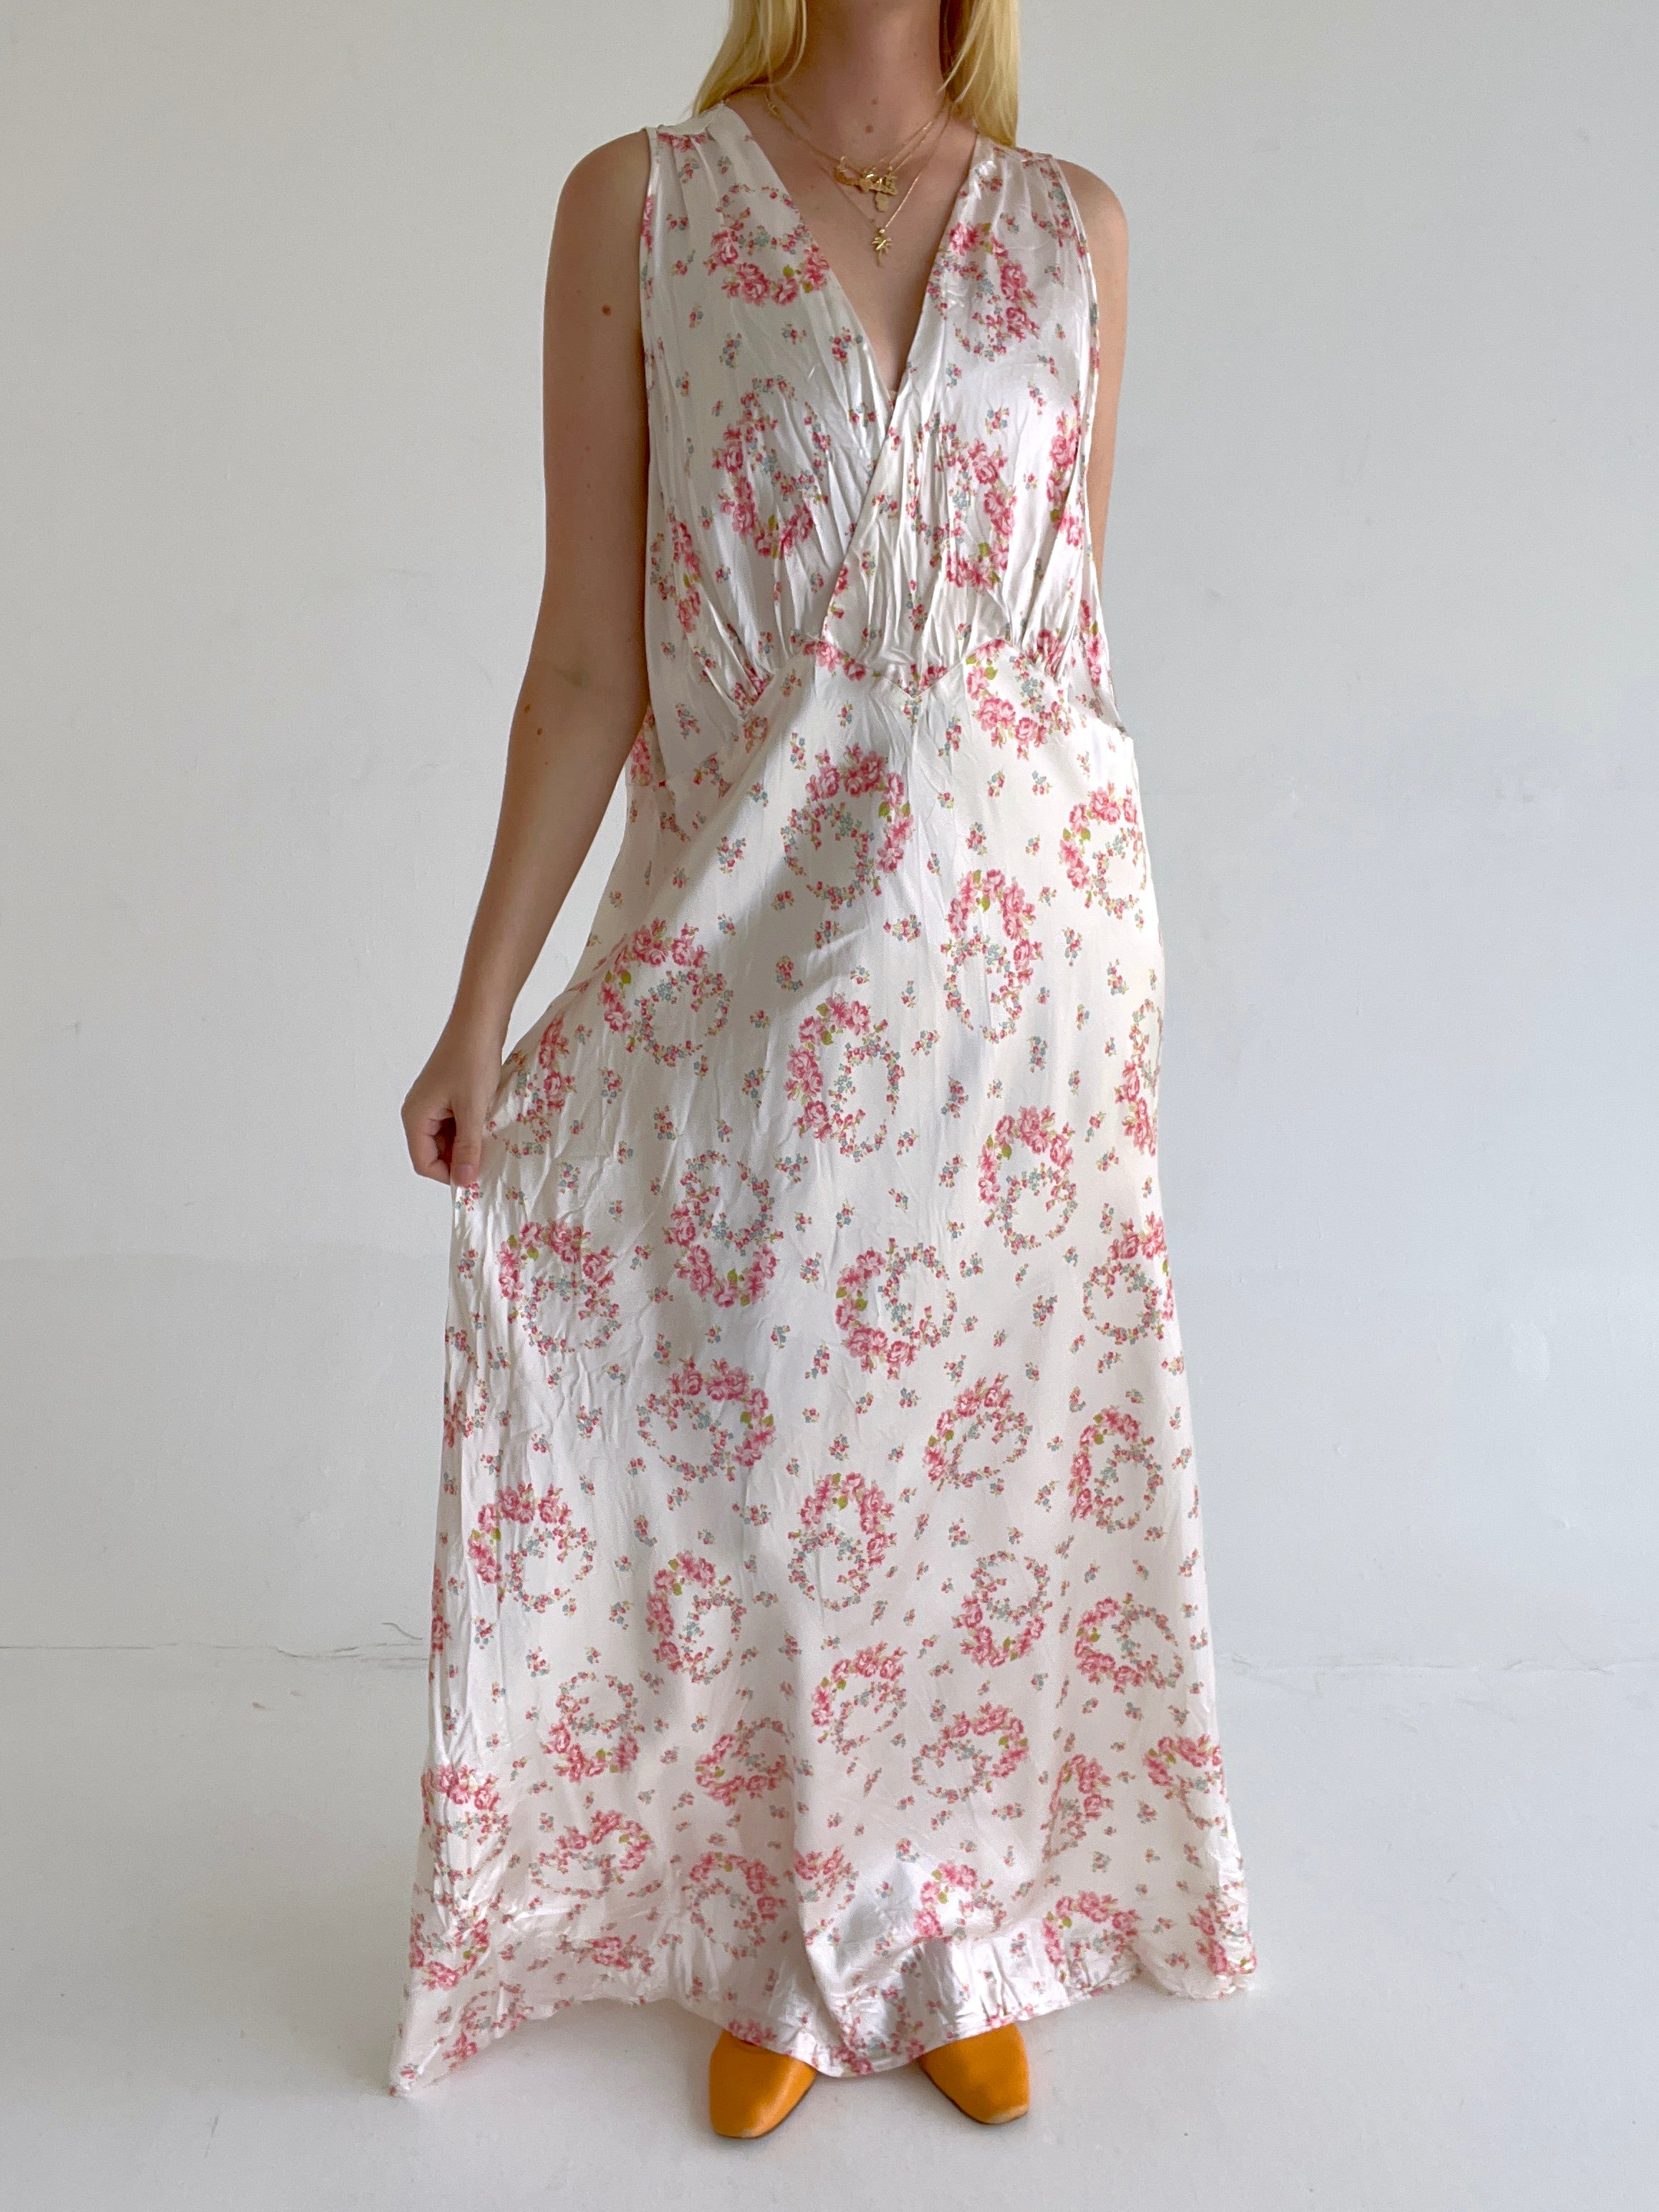 1930's White Slip with Pink Floral Wreath Print